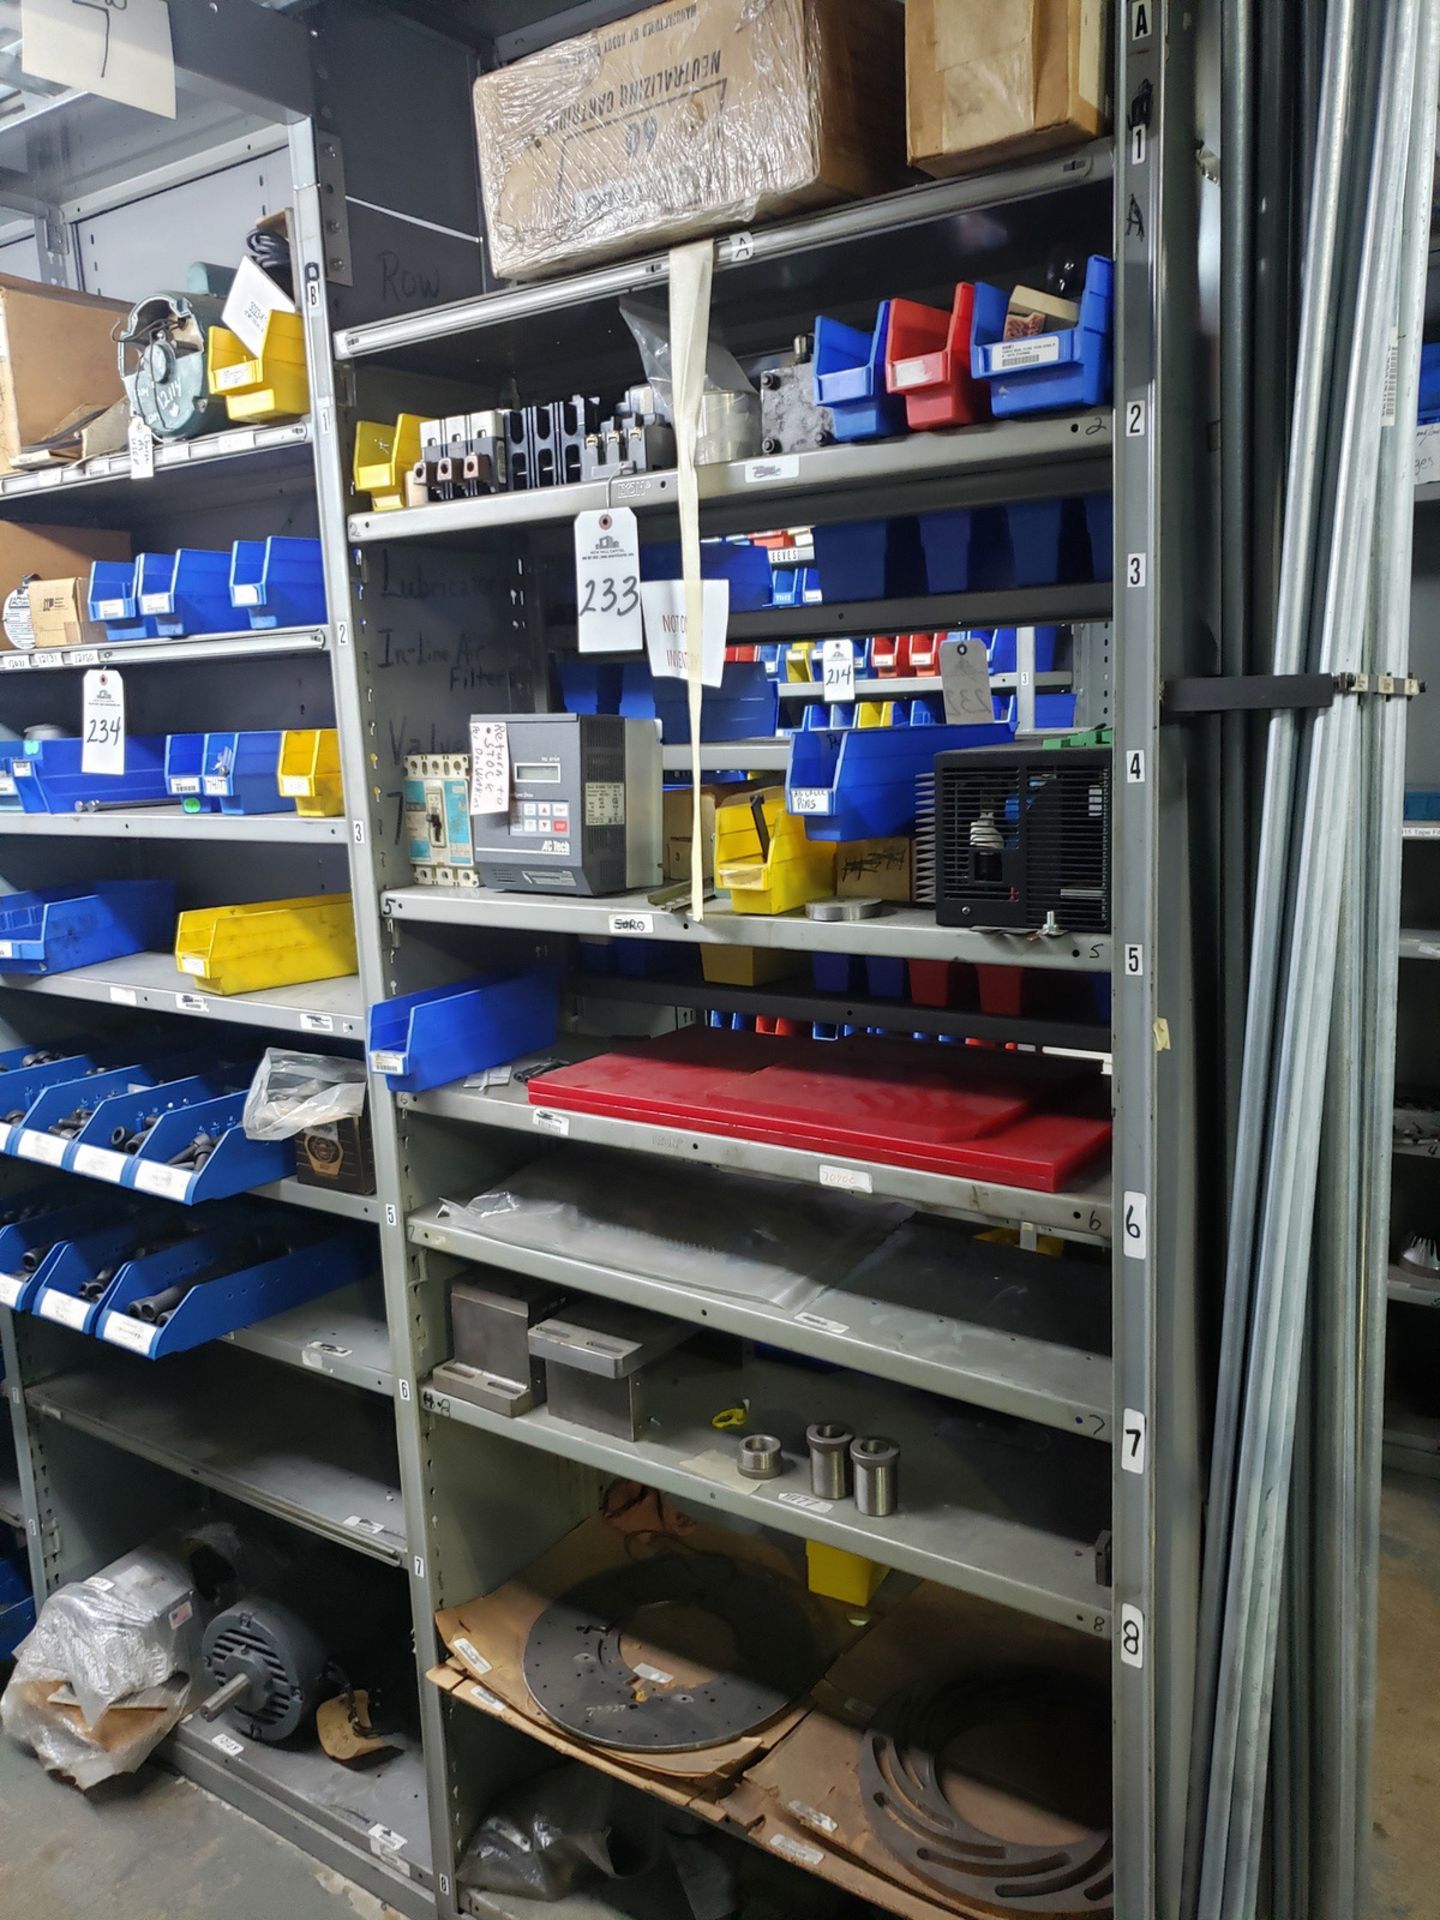 Contents of Shelving Section, Spare Parts & Supplies - Subj to Bulk | Rig Fee $50 (parts only)